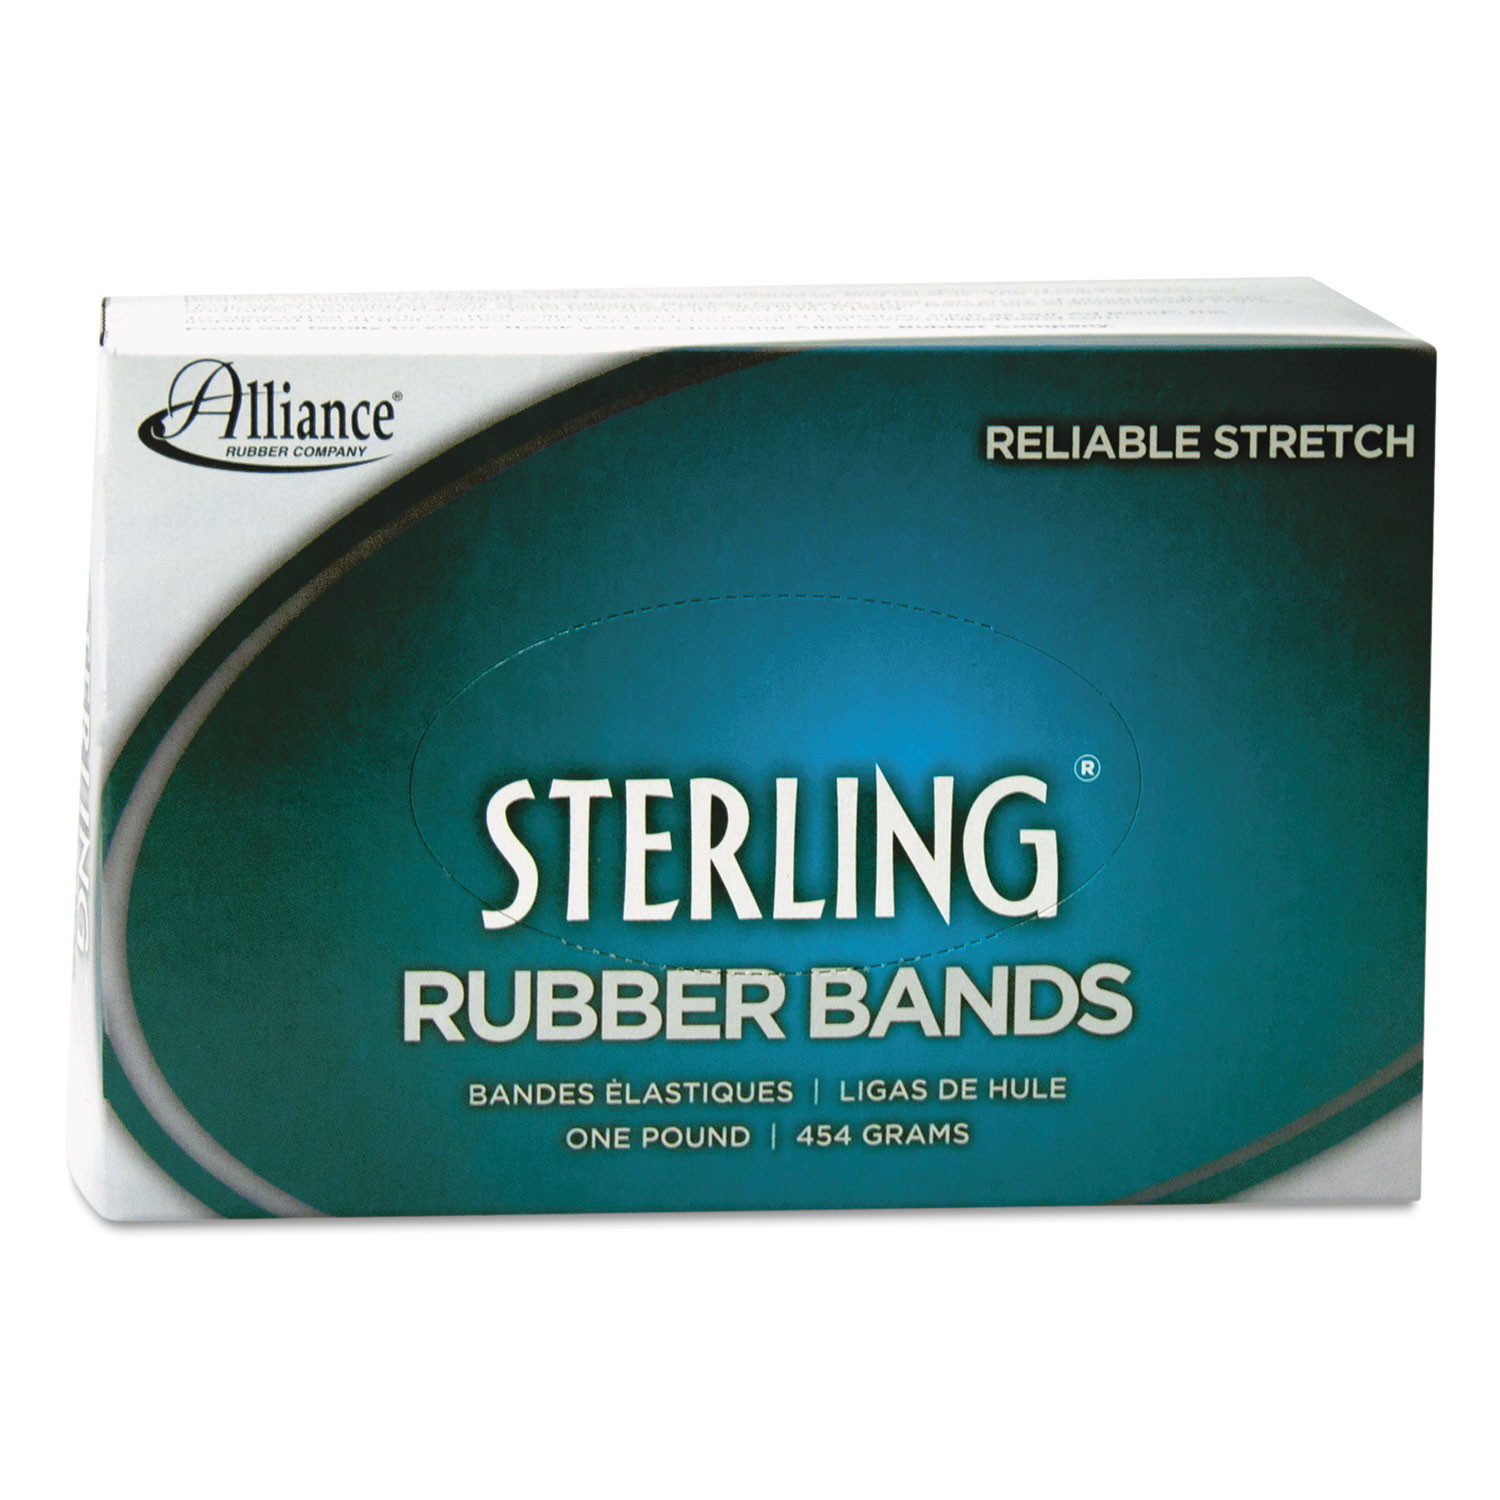 Sterling Rubber Bands Rubber Bands, 64, 3 1/2 x 1/4, 425 Bands/1lb Box